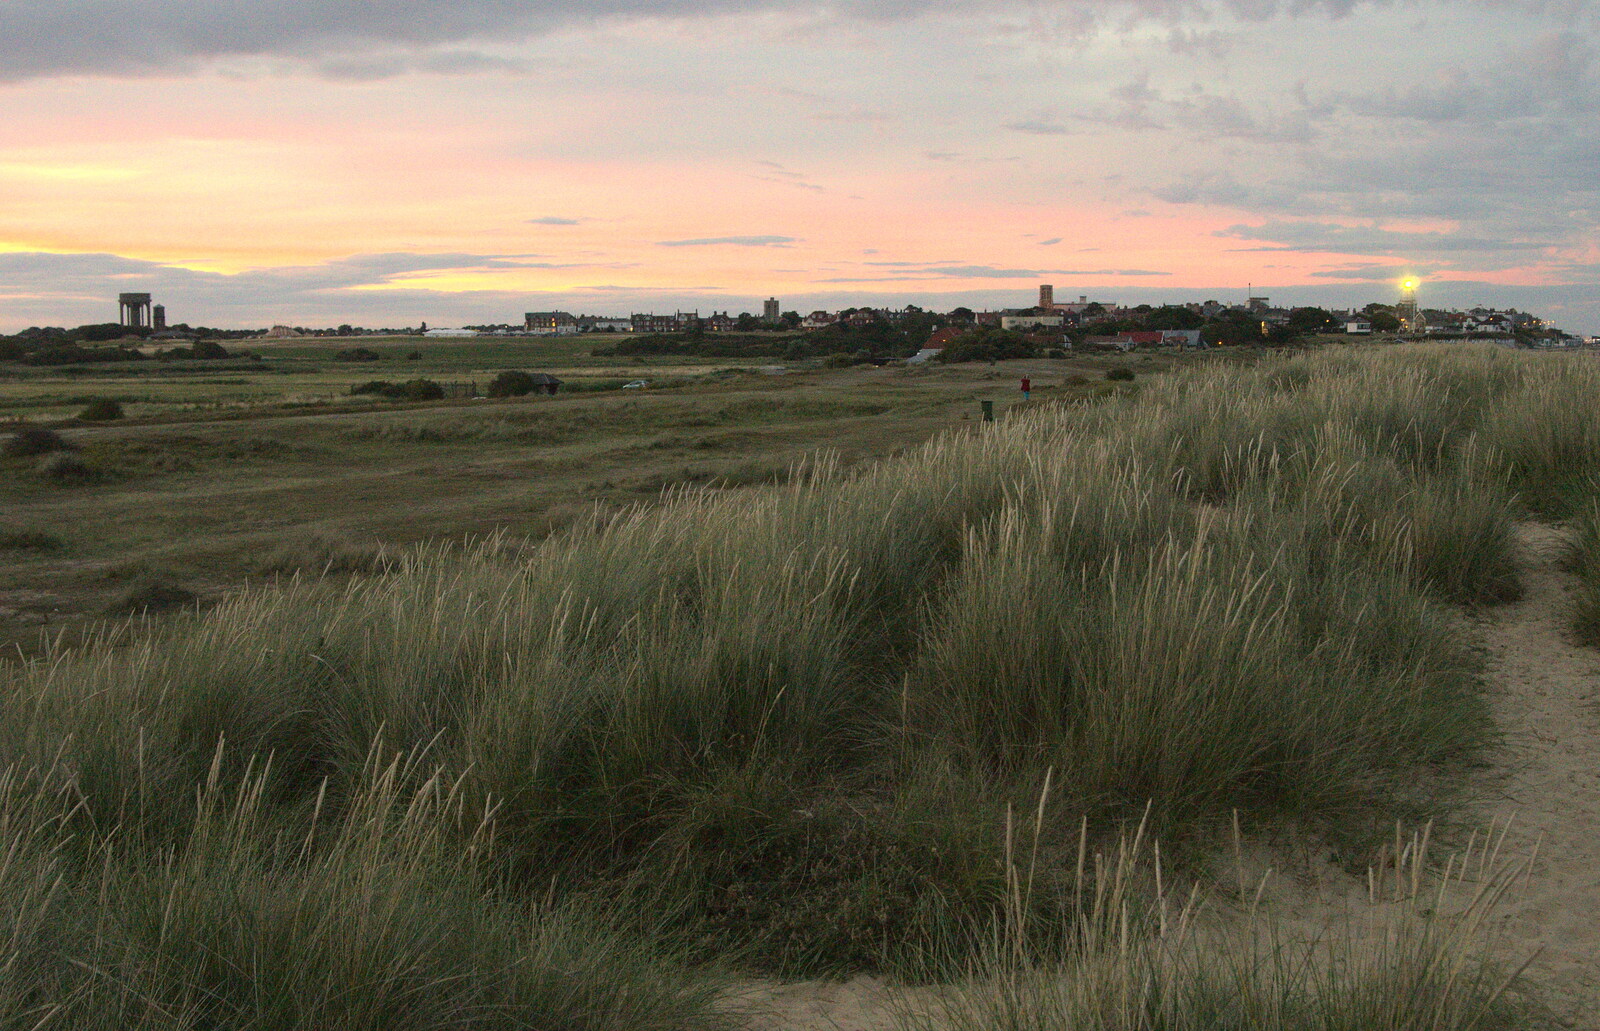 The dunes of Southwold Harbour beach from The Danger of Trees: A Camping (Mis)adventure - Southwold, Suffolk - 3rd August 2015